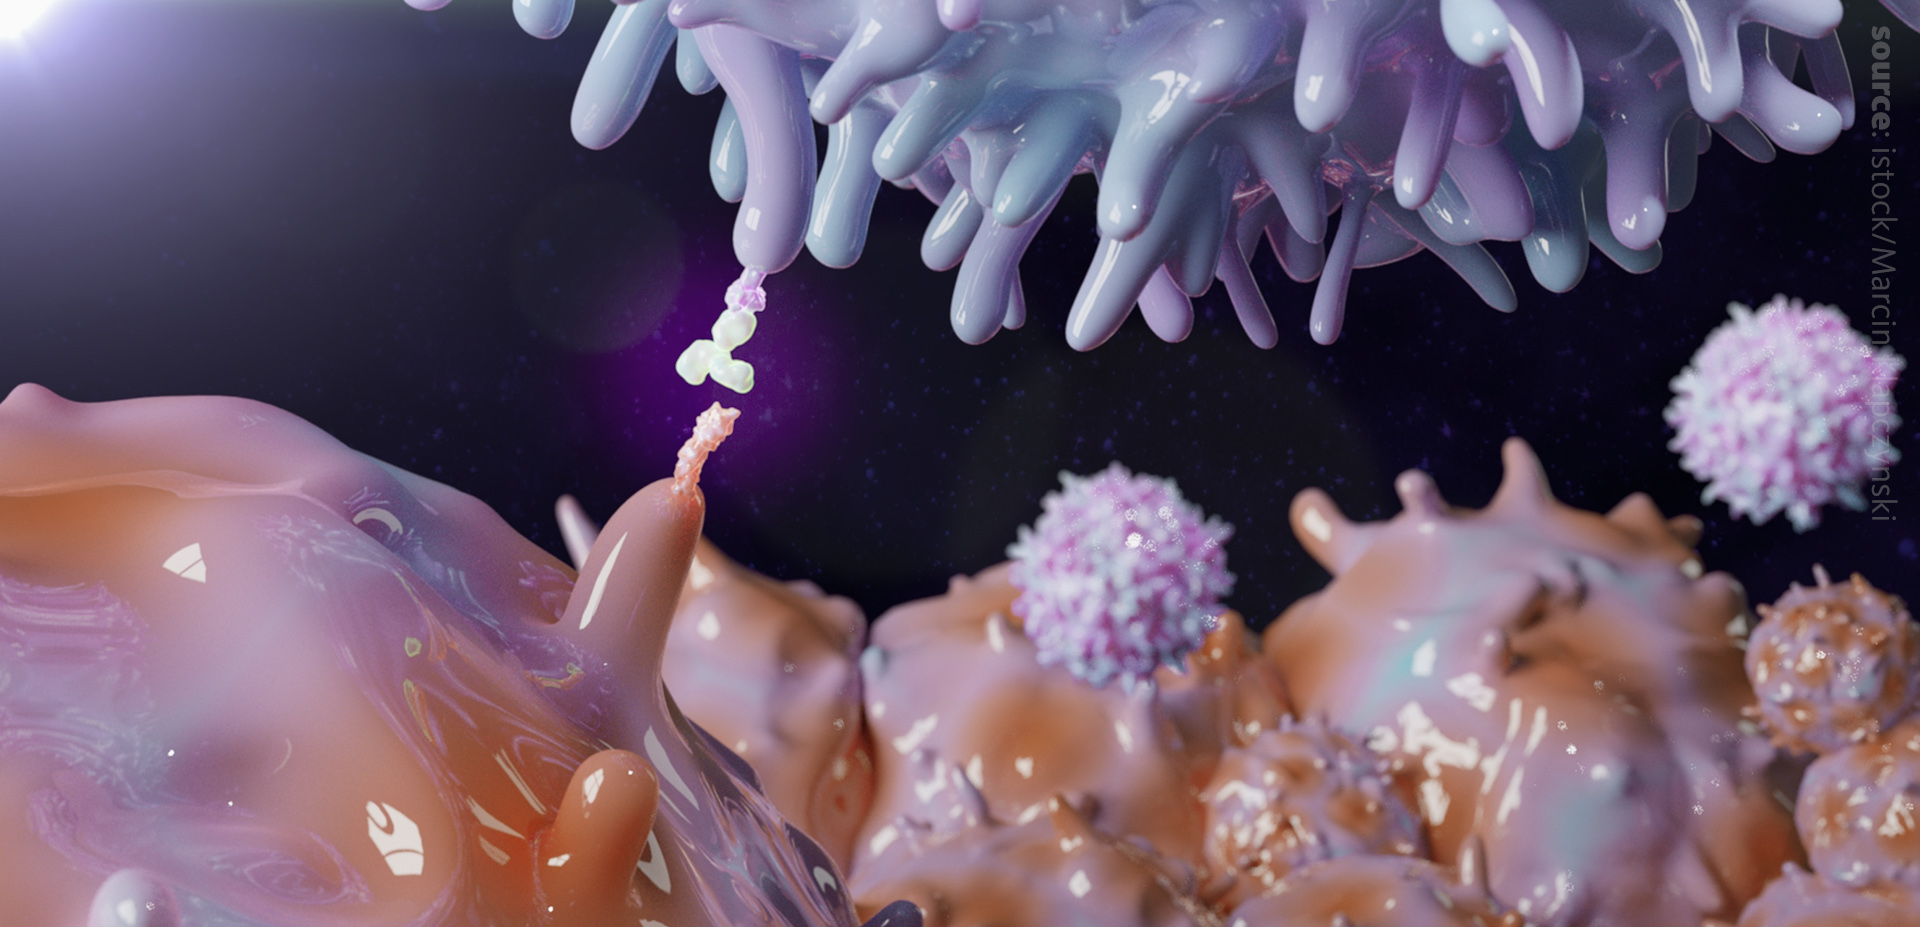 A computer render graphic showing a dendritic cell presenting an antigen to a T cell.